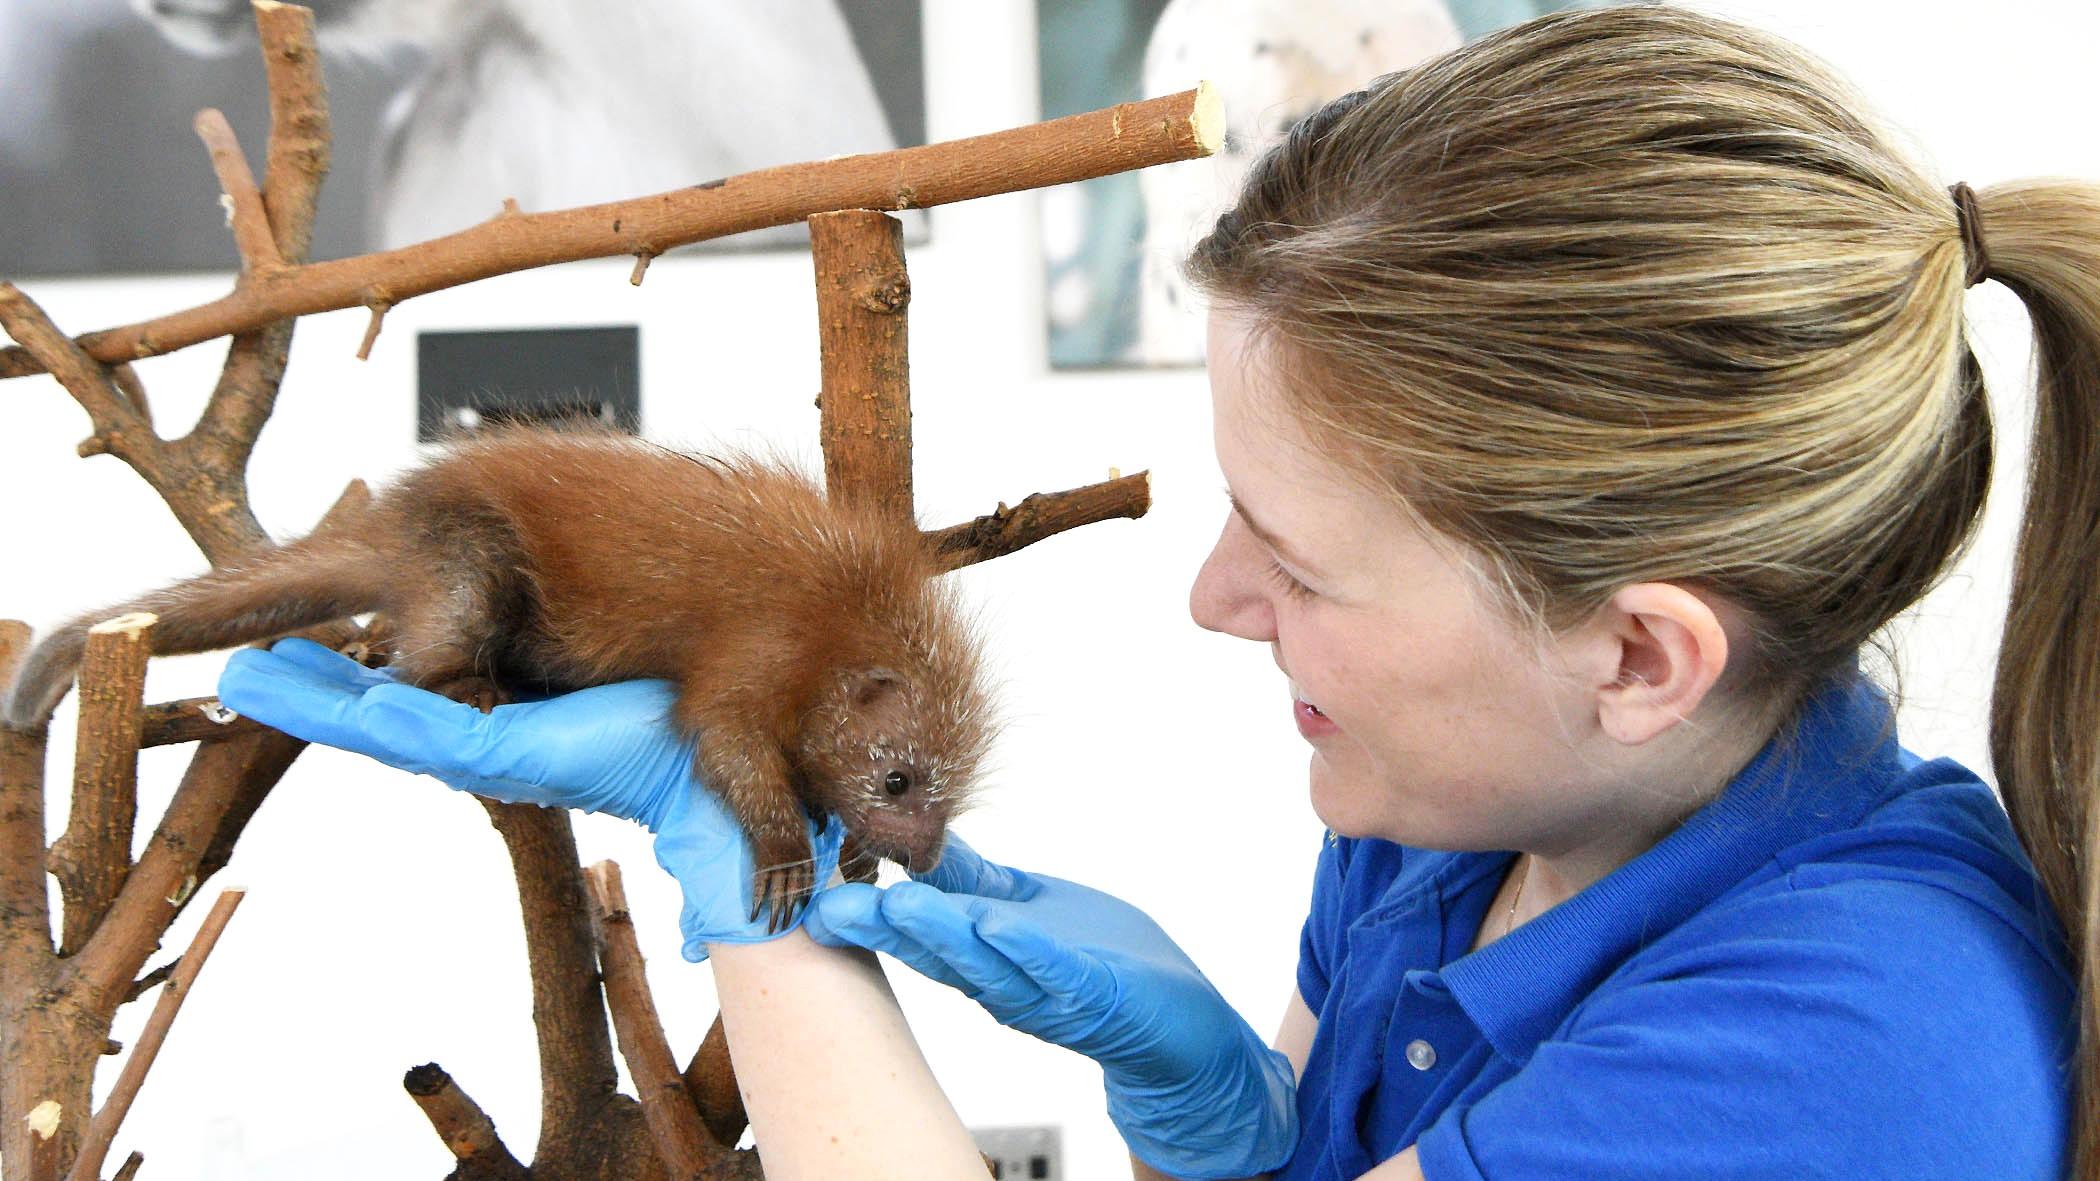 Maggie Chardell, a lead animal care specialist for the Chicago Zoological Society, is among the team hand-rearing the newborn porcupette. (Jim Schulz / CZS-Brookfield Zoo)  